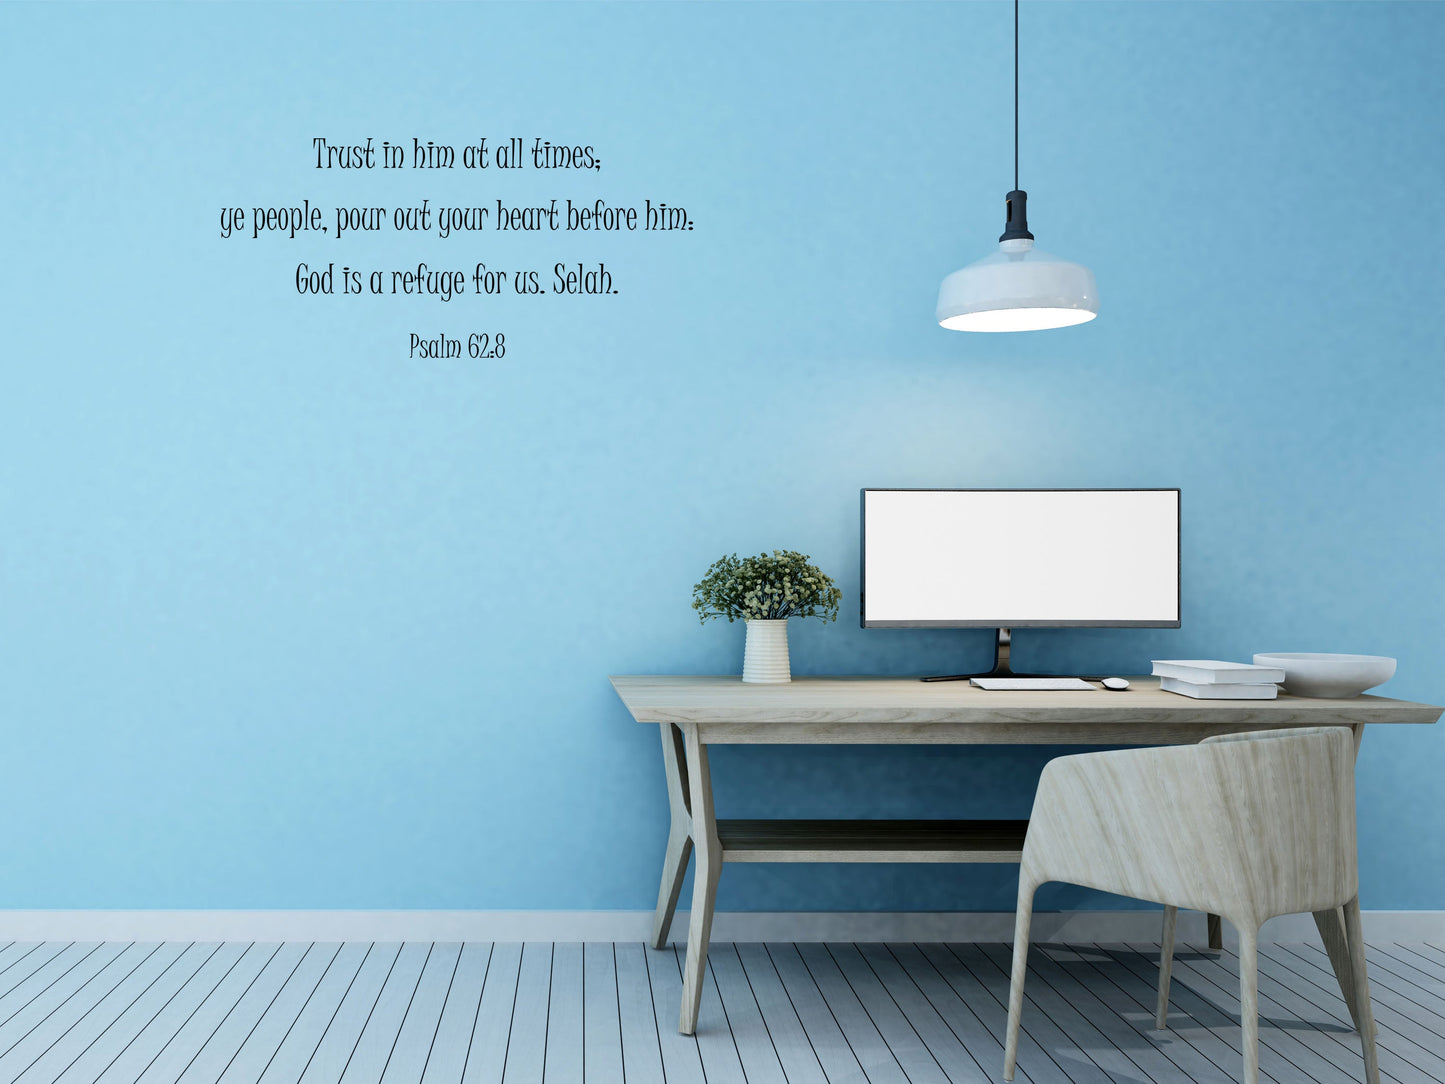 Psalm 62:8 - Scripture Wall Decals Vinyl Wall Decal Inspirational Wall Signs 